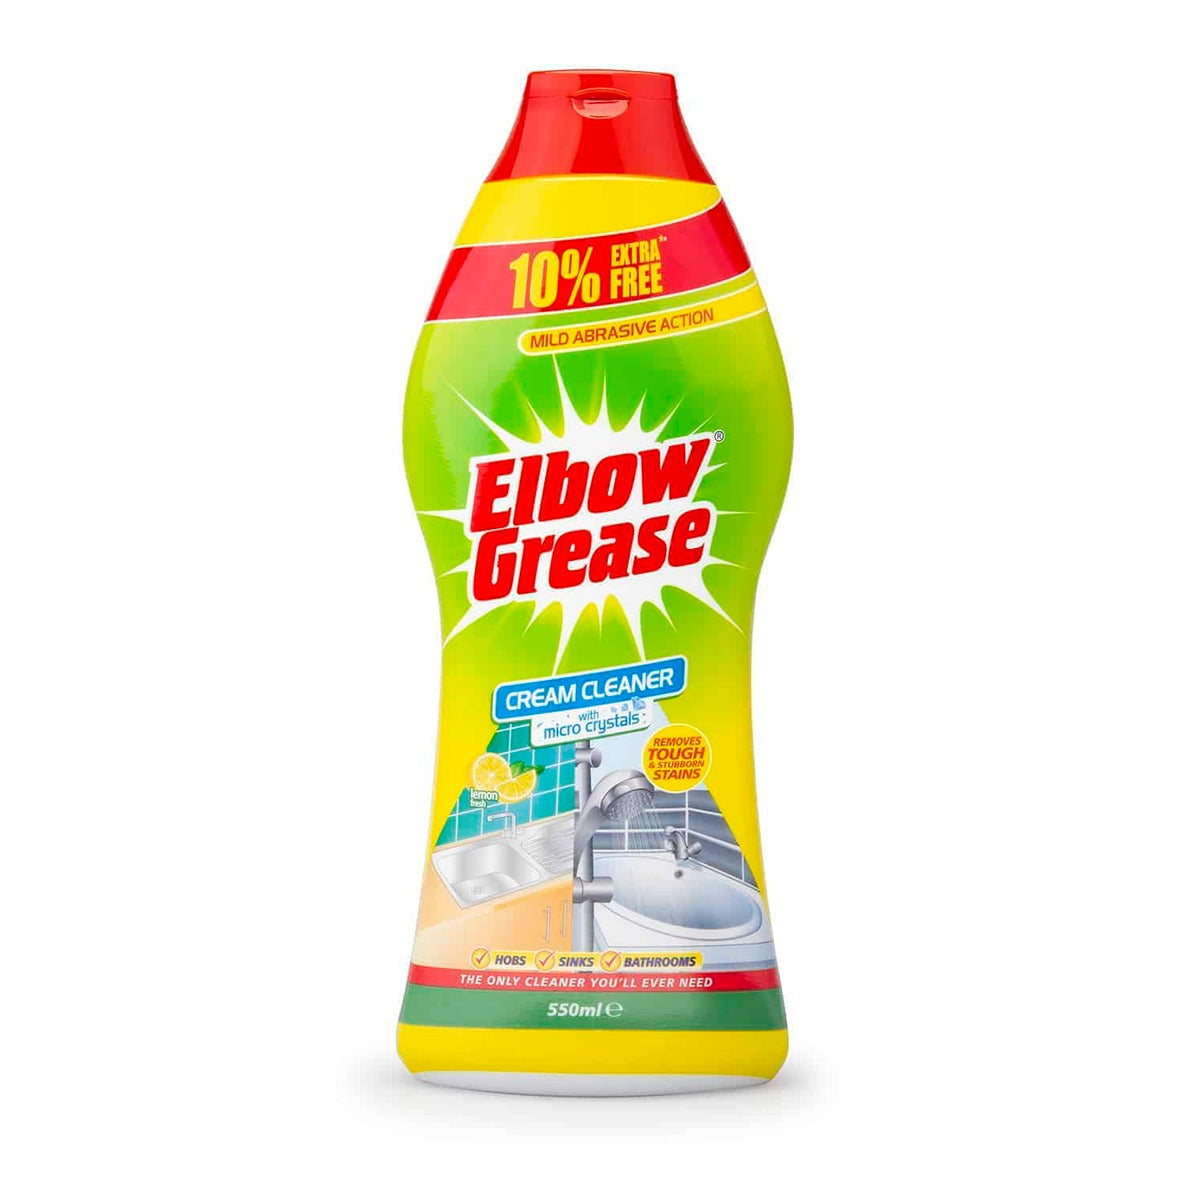 Elbow Grease - Cream Cleaner - 550ml - Continental Food Store